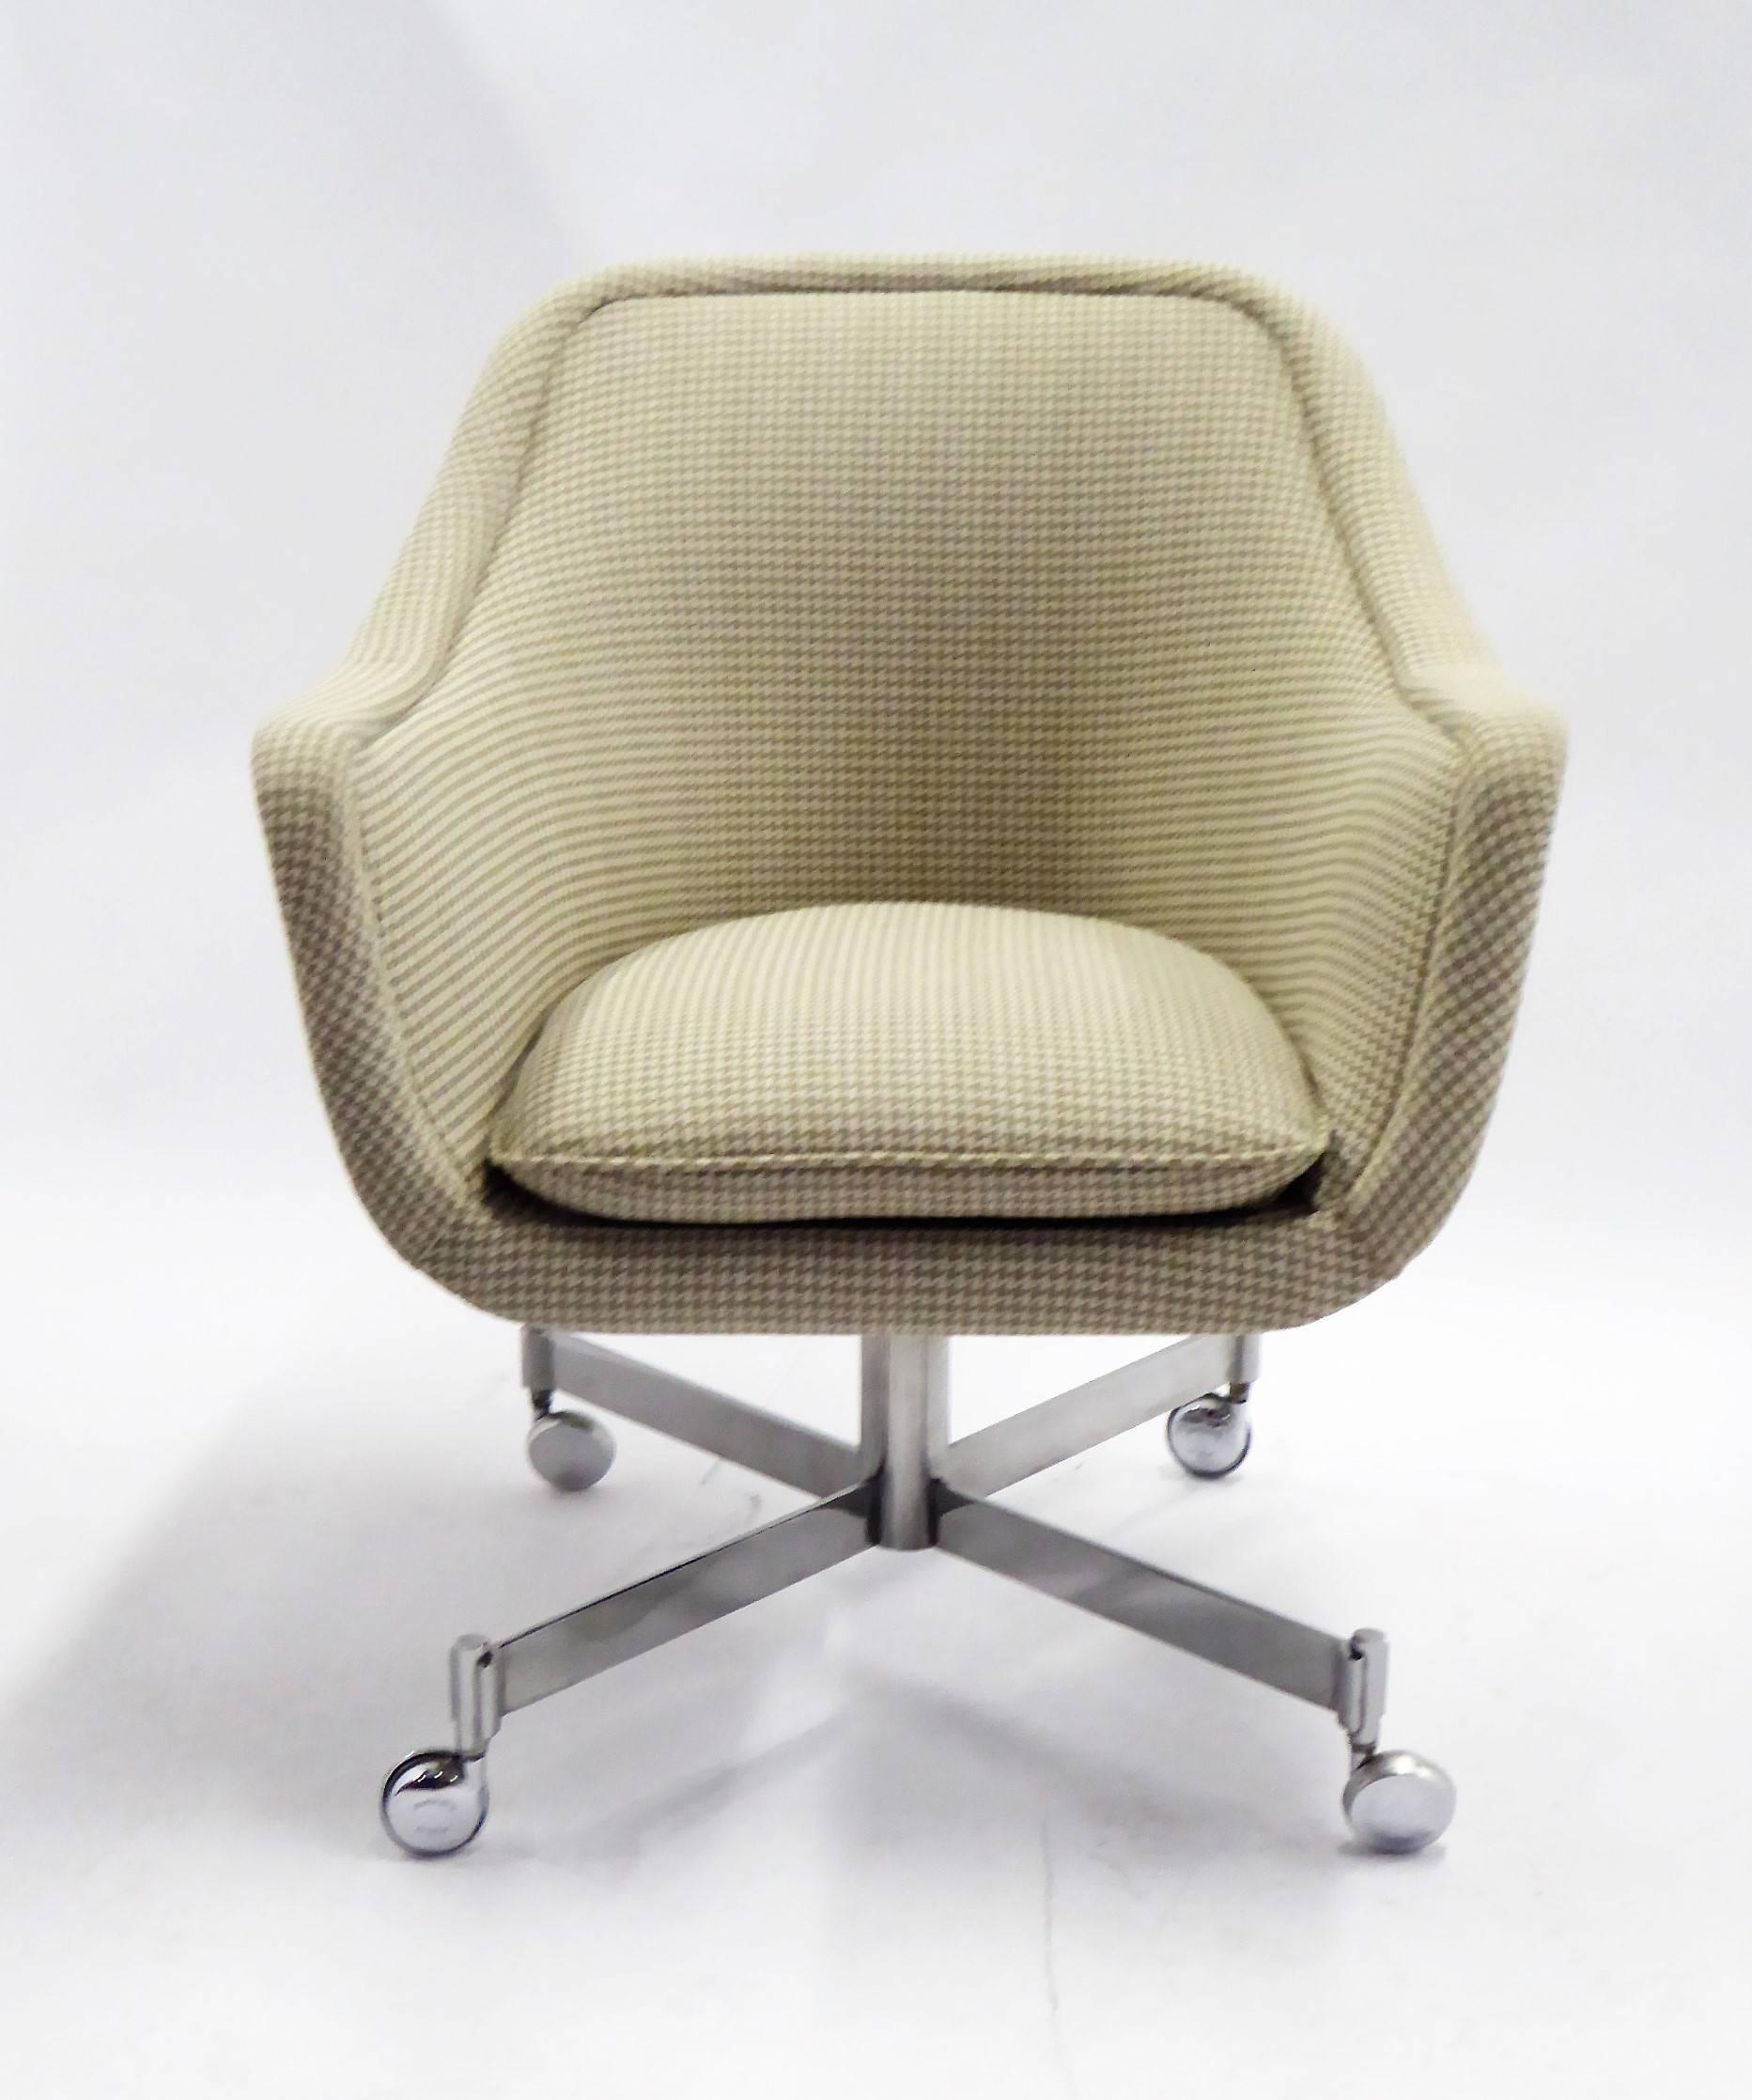 The Ward Bennett 1964 designed bumper desk chair, here reupholstered in a neutral beige Houndstooth fabric. This early Brickel Associates Bumper is a true bucket chair, with a design based on principles of the George Washington swivel chair: a short